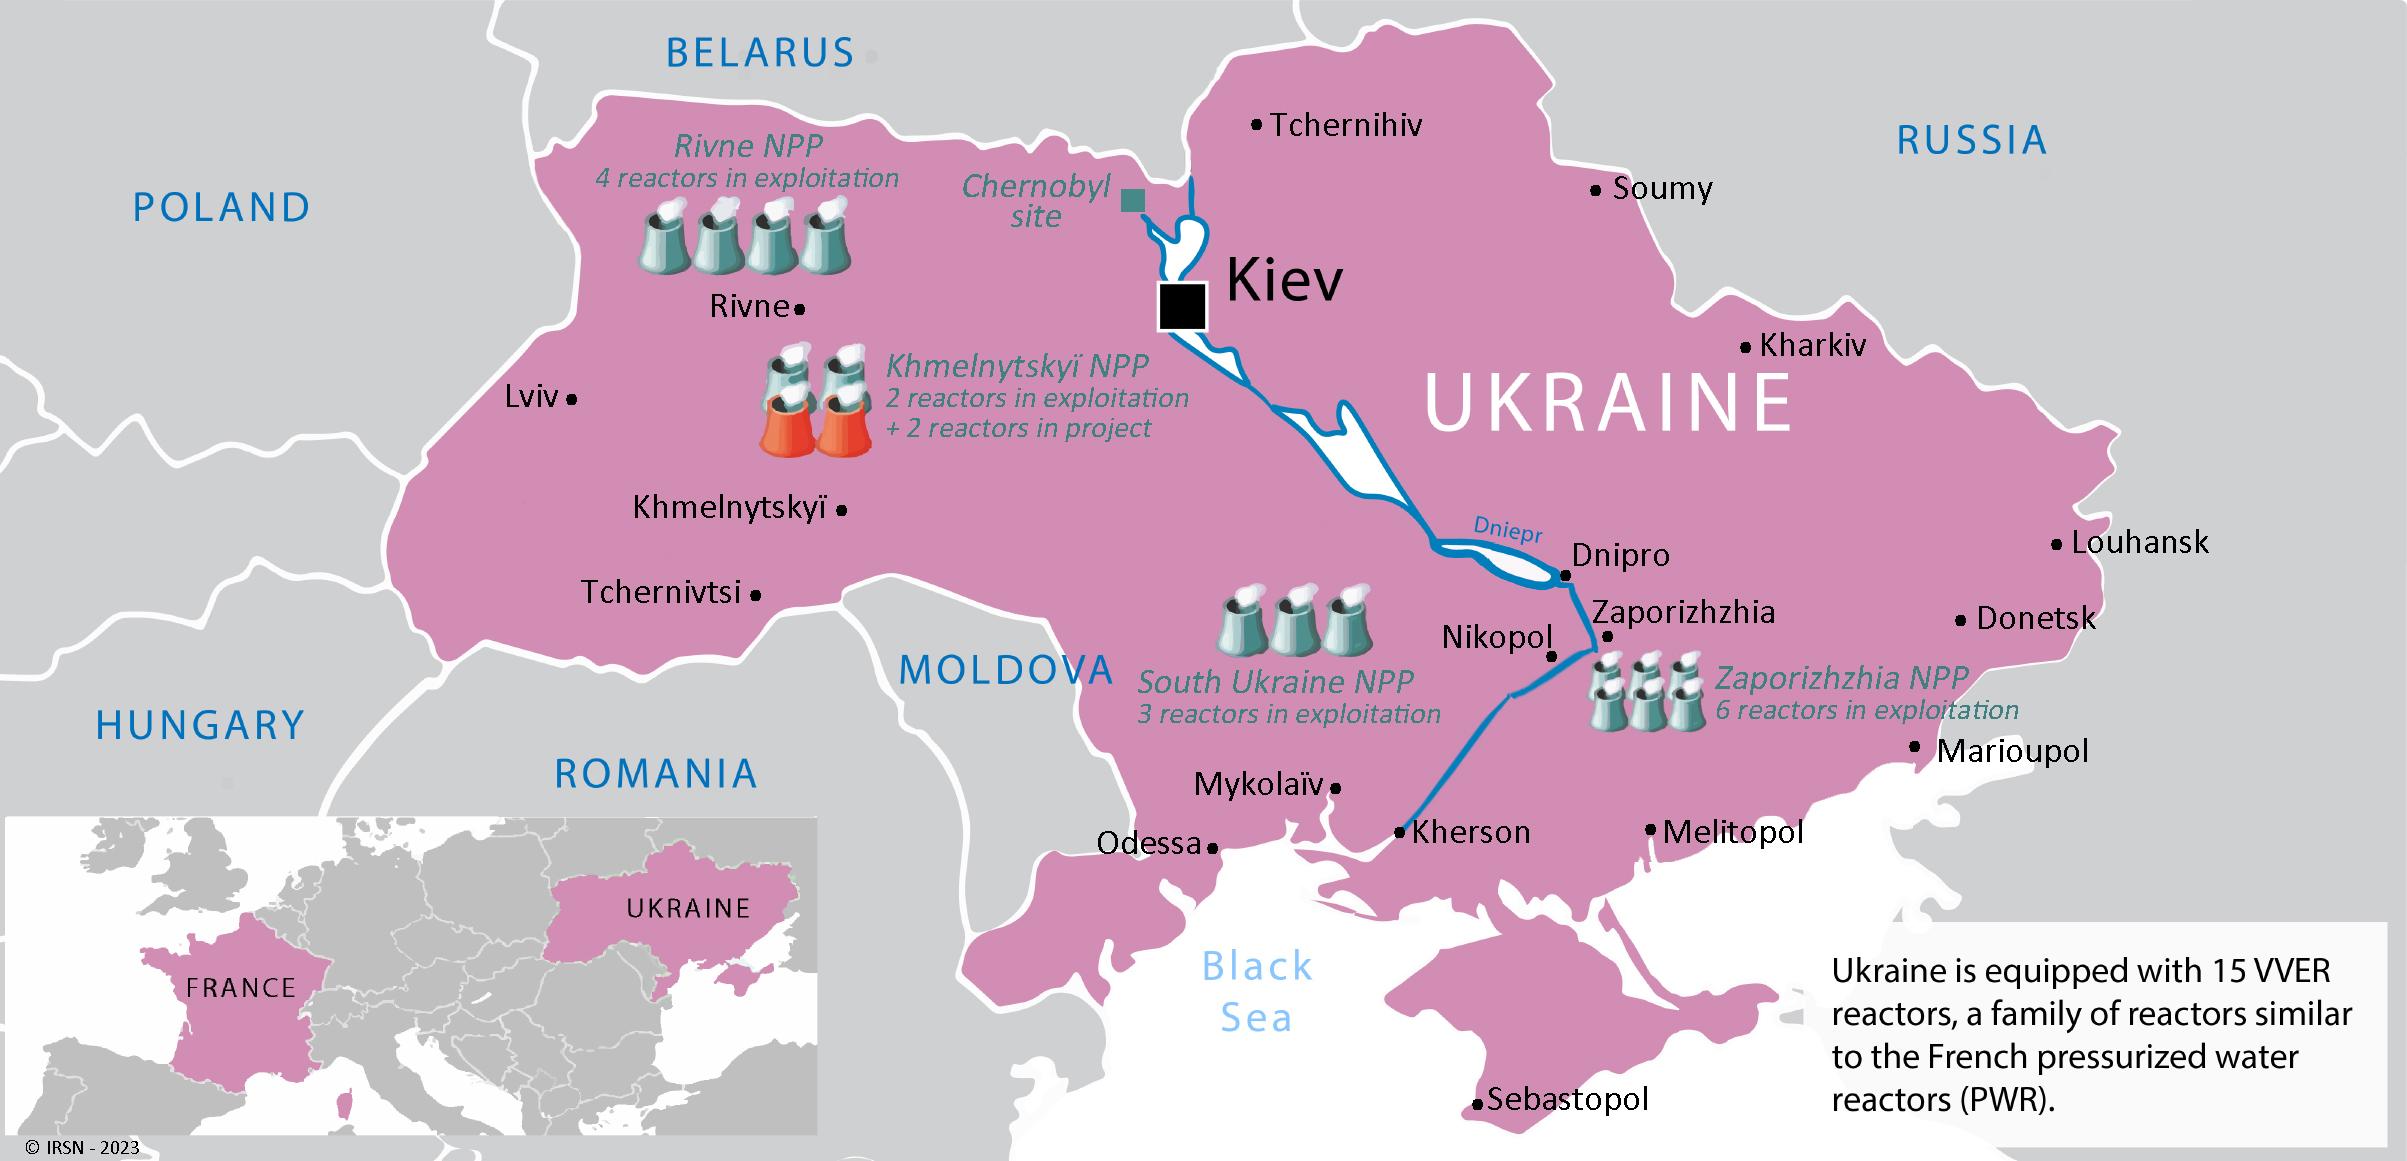 Map on nuclear installations in Ukraine